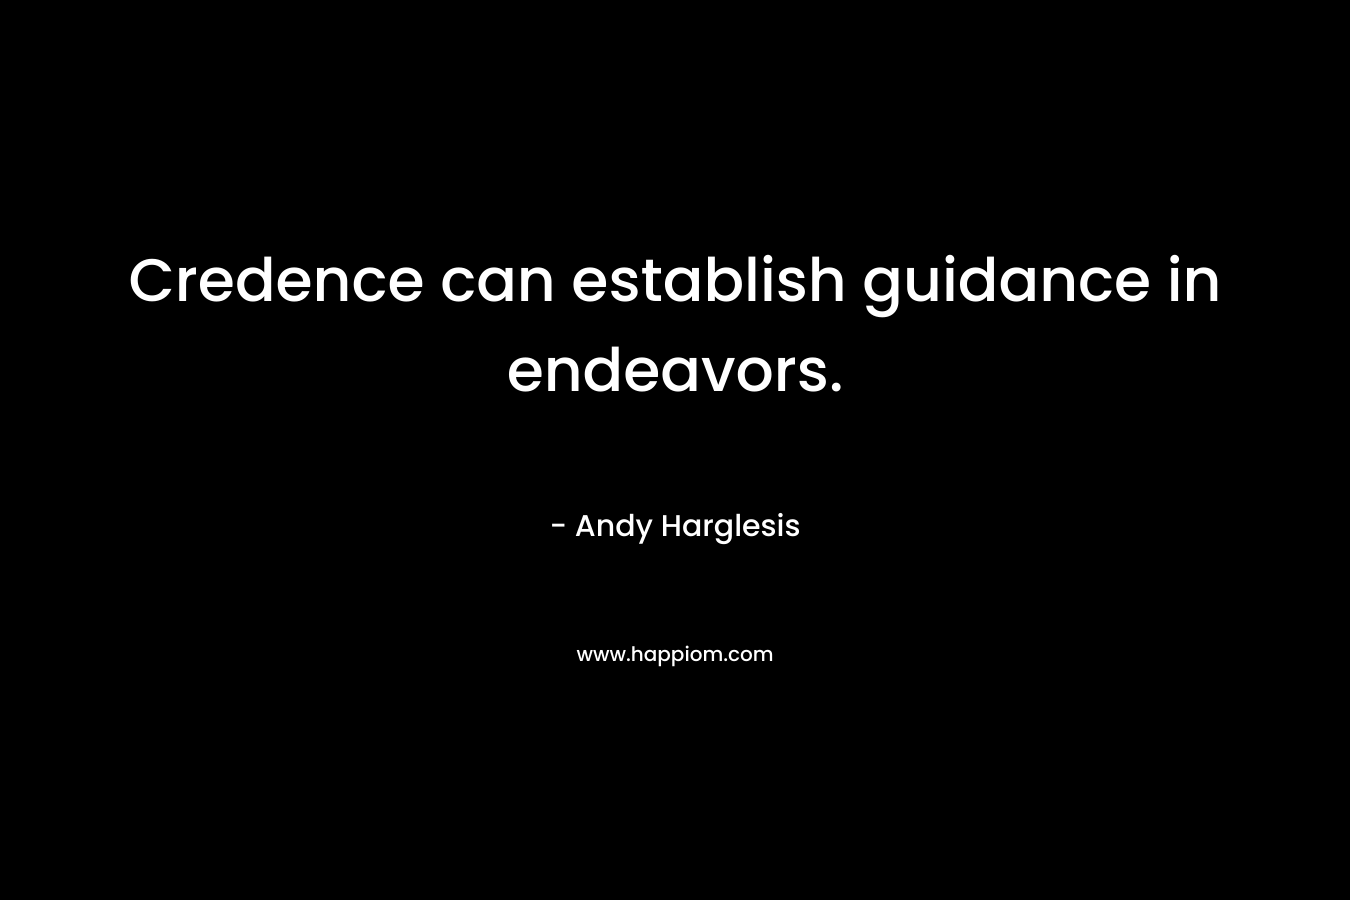 Credence can establish guidance in endeavors. – Andy Harglesis